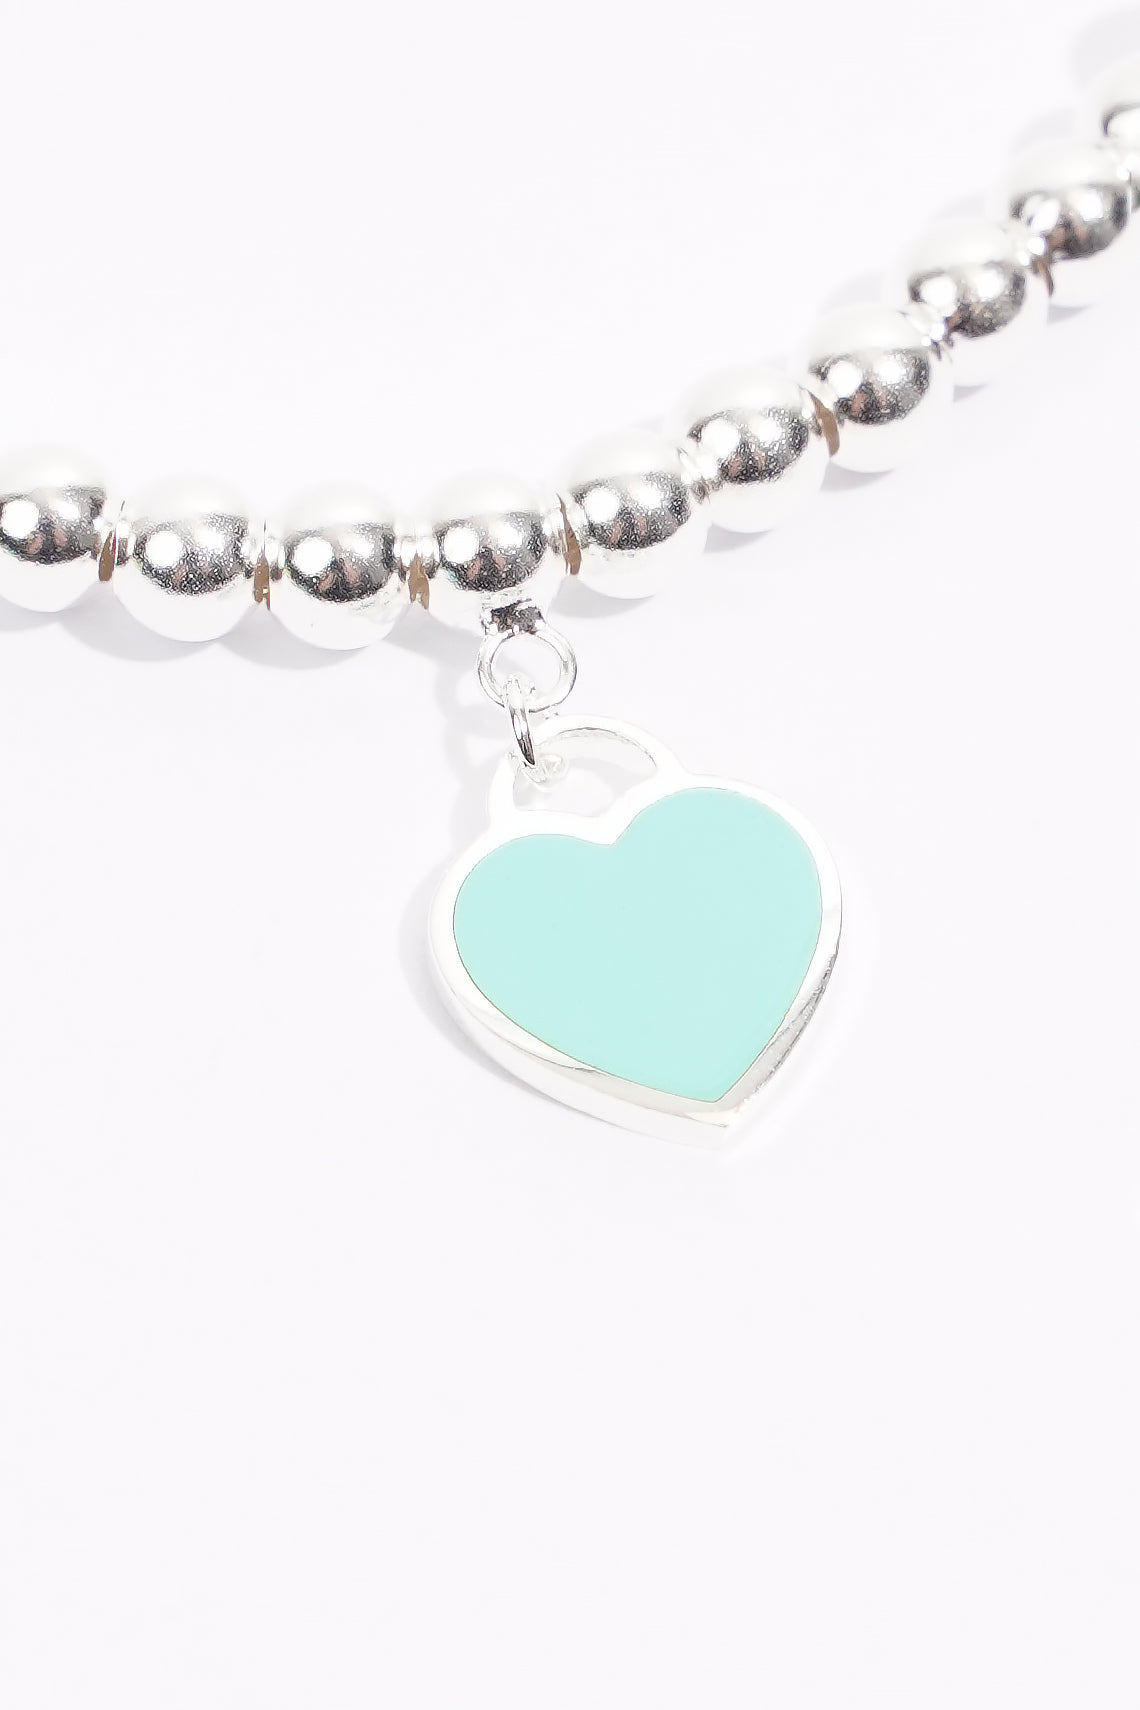 Tiffany and Co Blue Heart Bead Bracelet Silver Silver Sterling 17cm ...